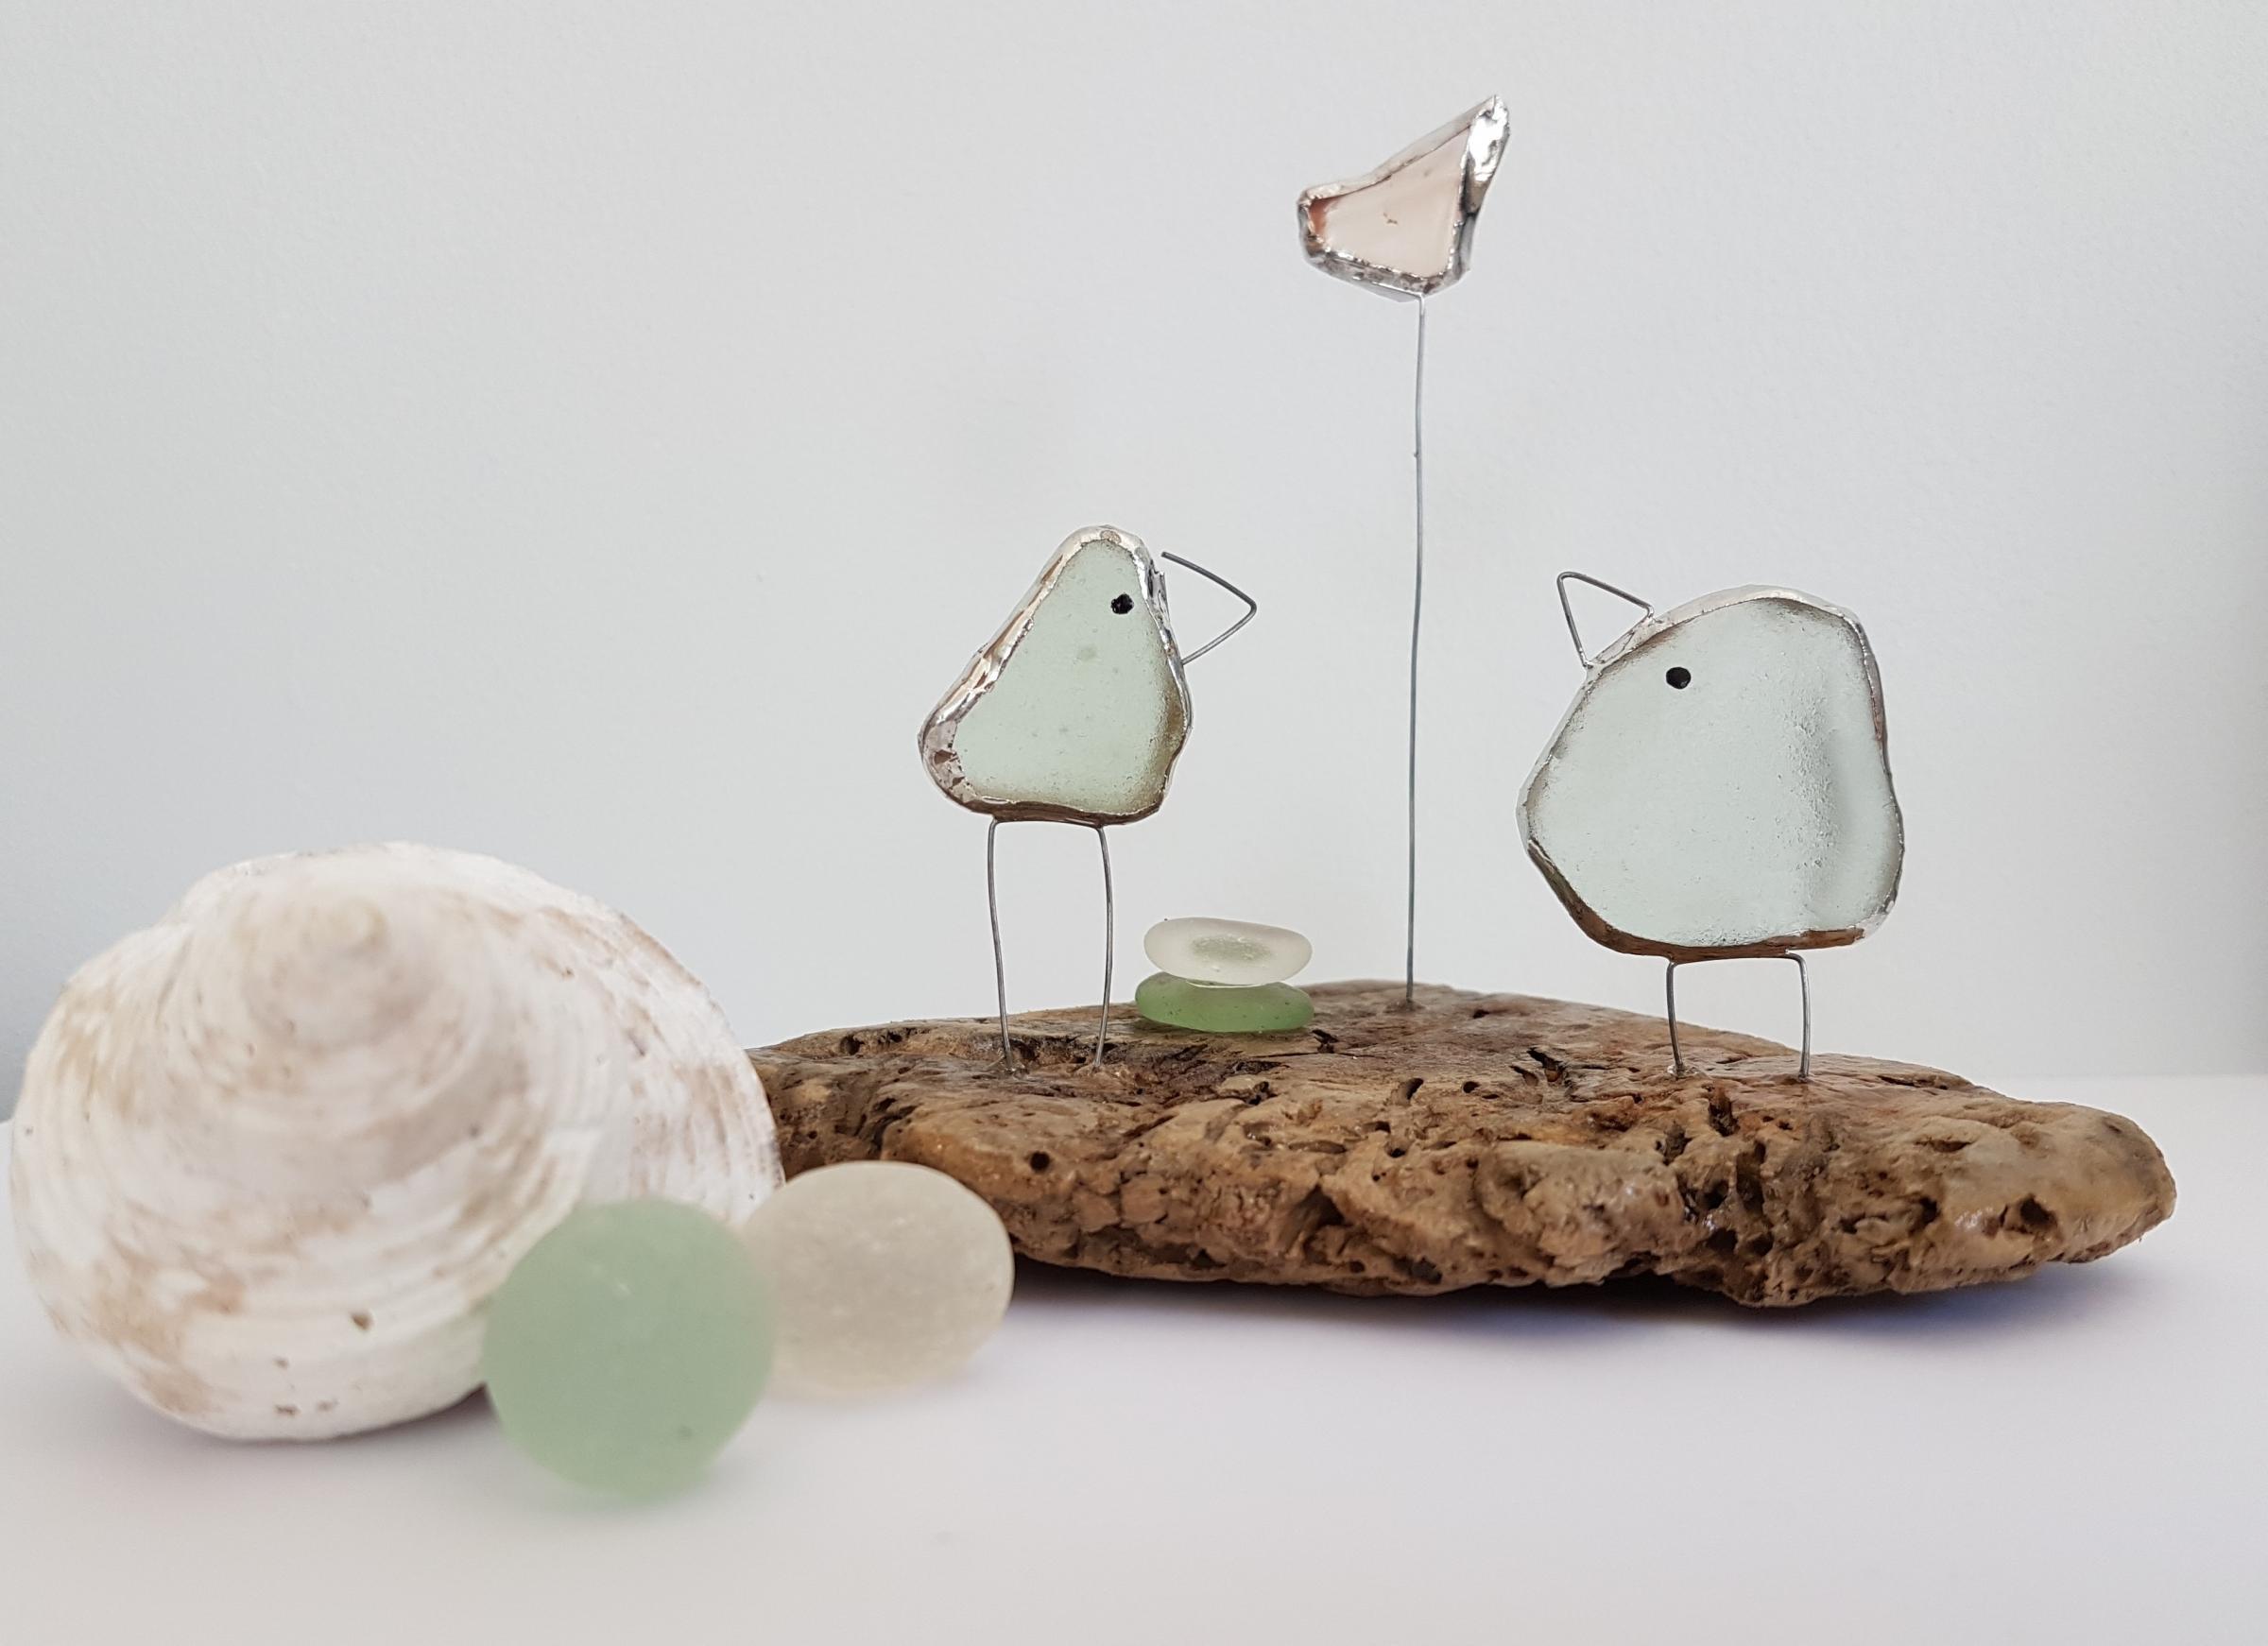 Sea glass and driftwood soldered with wire to make a unique and quirky ornament.